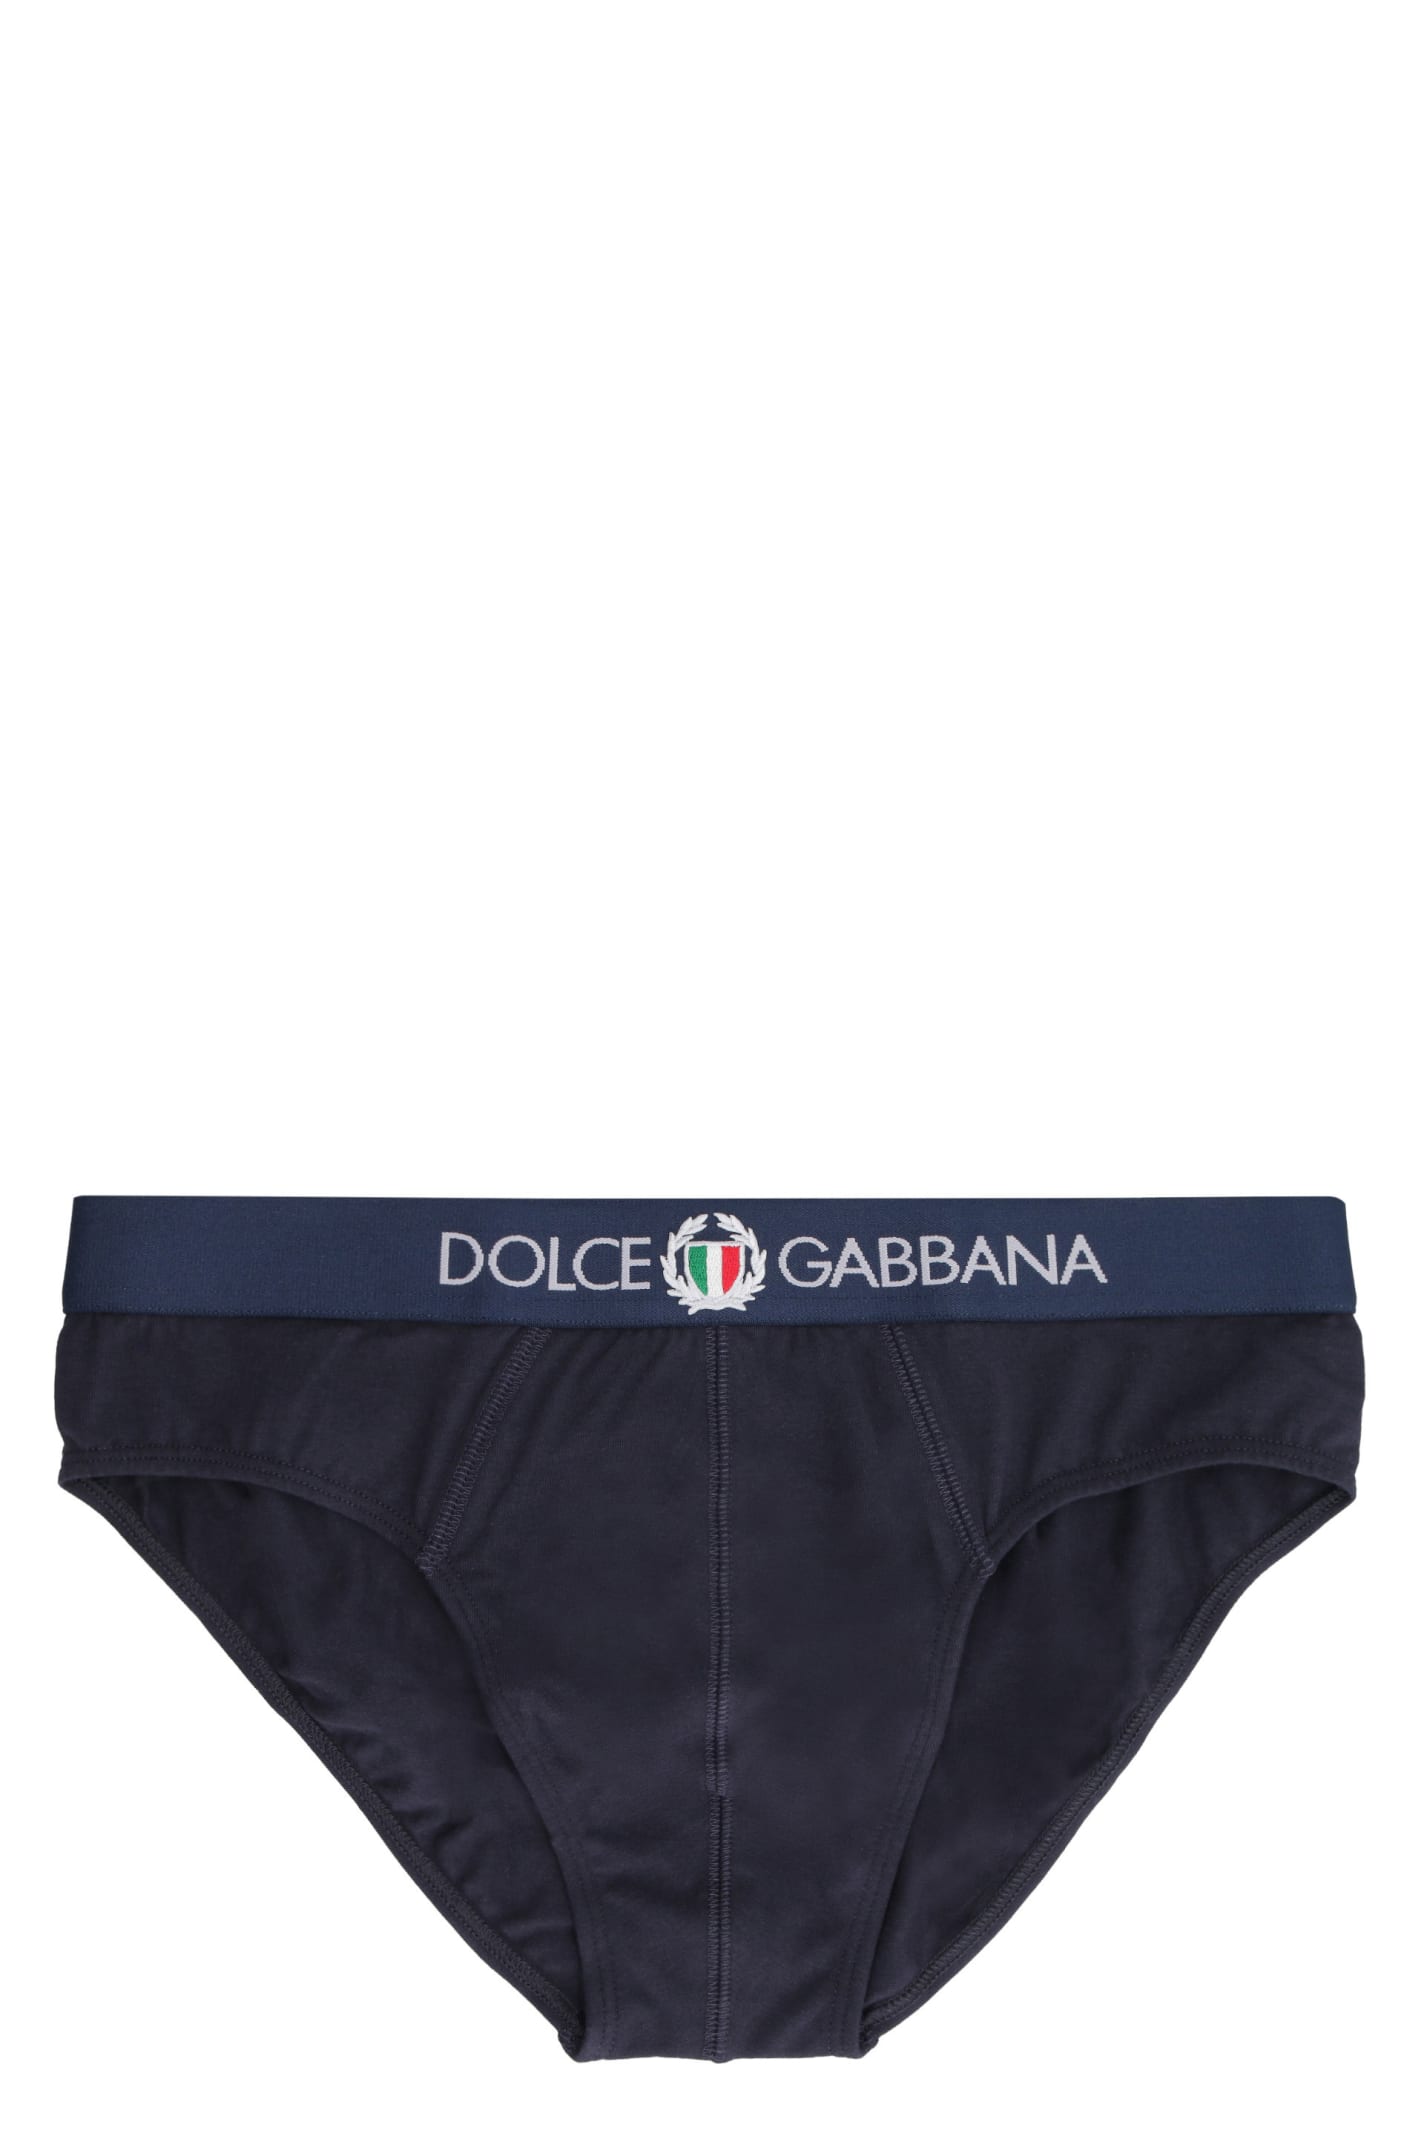 Dolce & Gabbana Cotton Briefs With Elastic Band